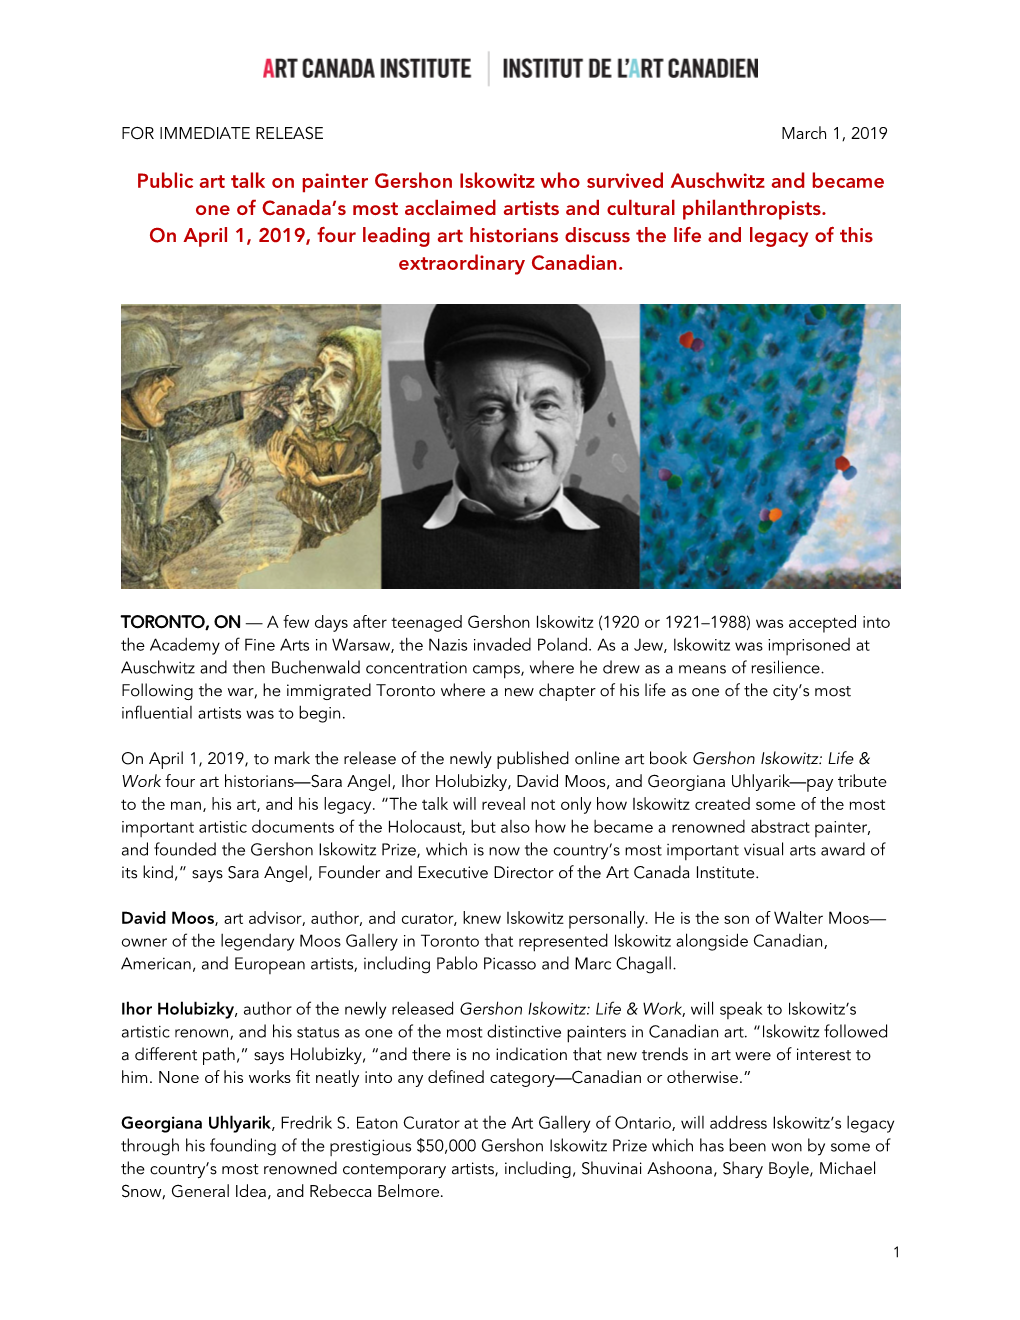 Public Art Talk on Painter Gershon Iskowitz Who Survived Auschwitz and Became One of Canada’S Most Acclaimed Artists and Cultural Philanthropists